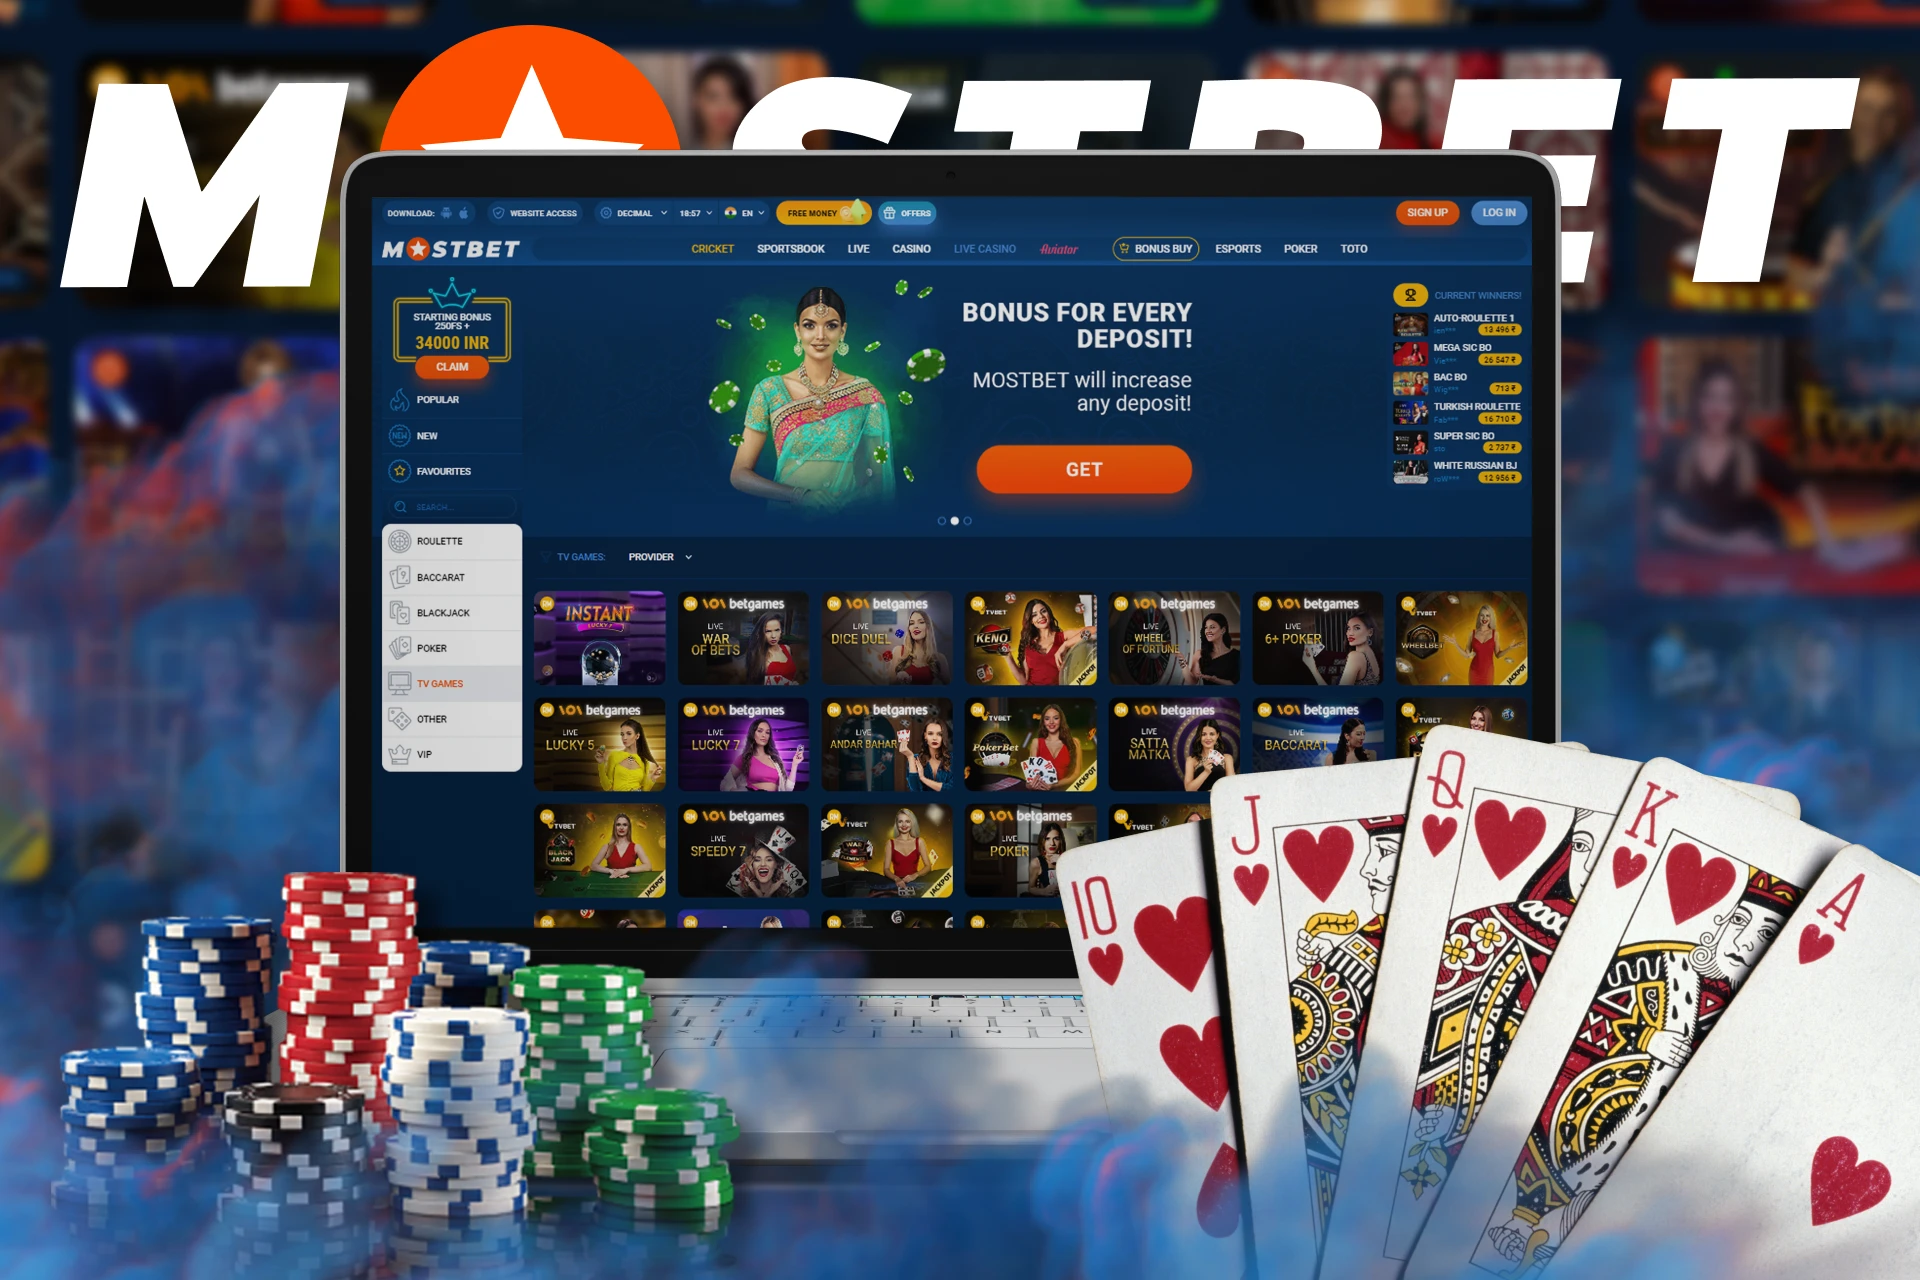 You can play TV games in Live Casino from Mostbet.